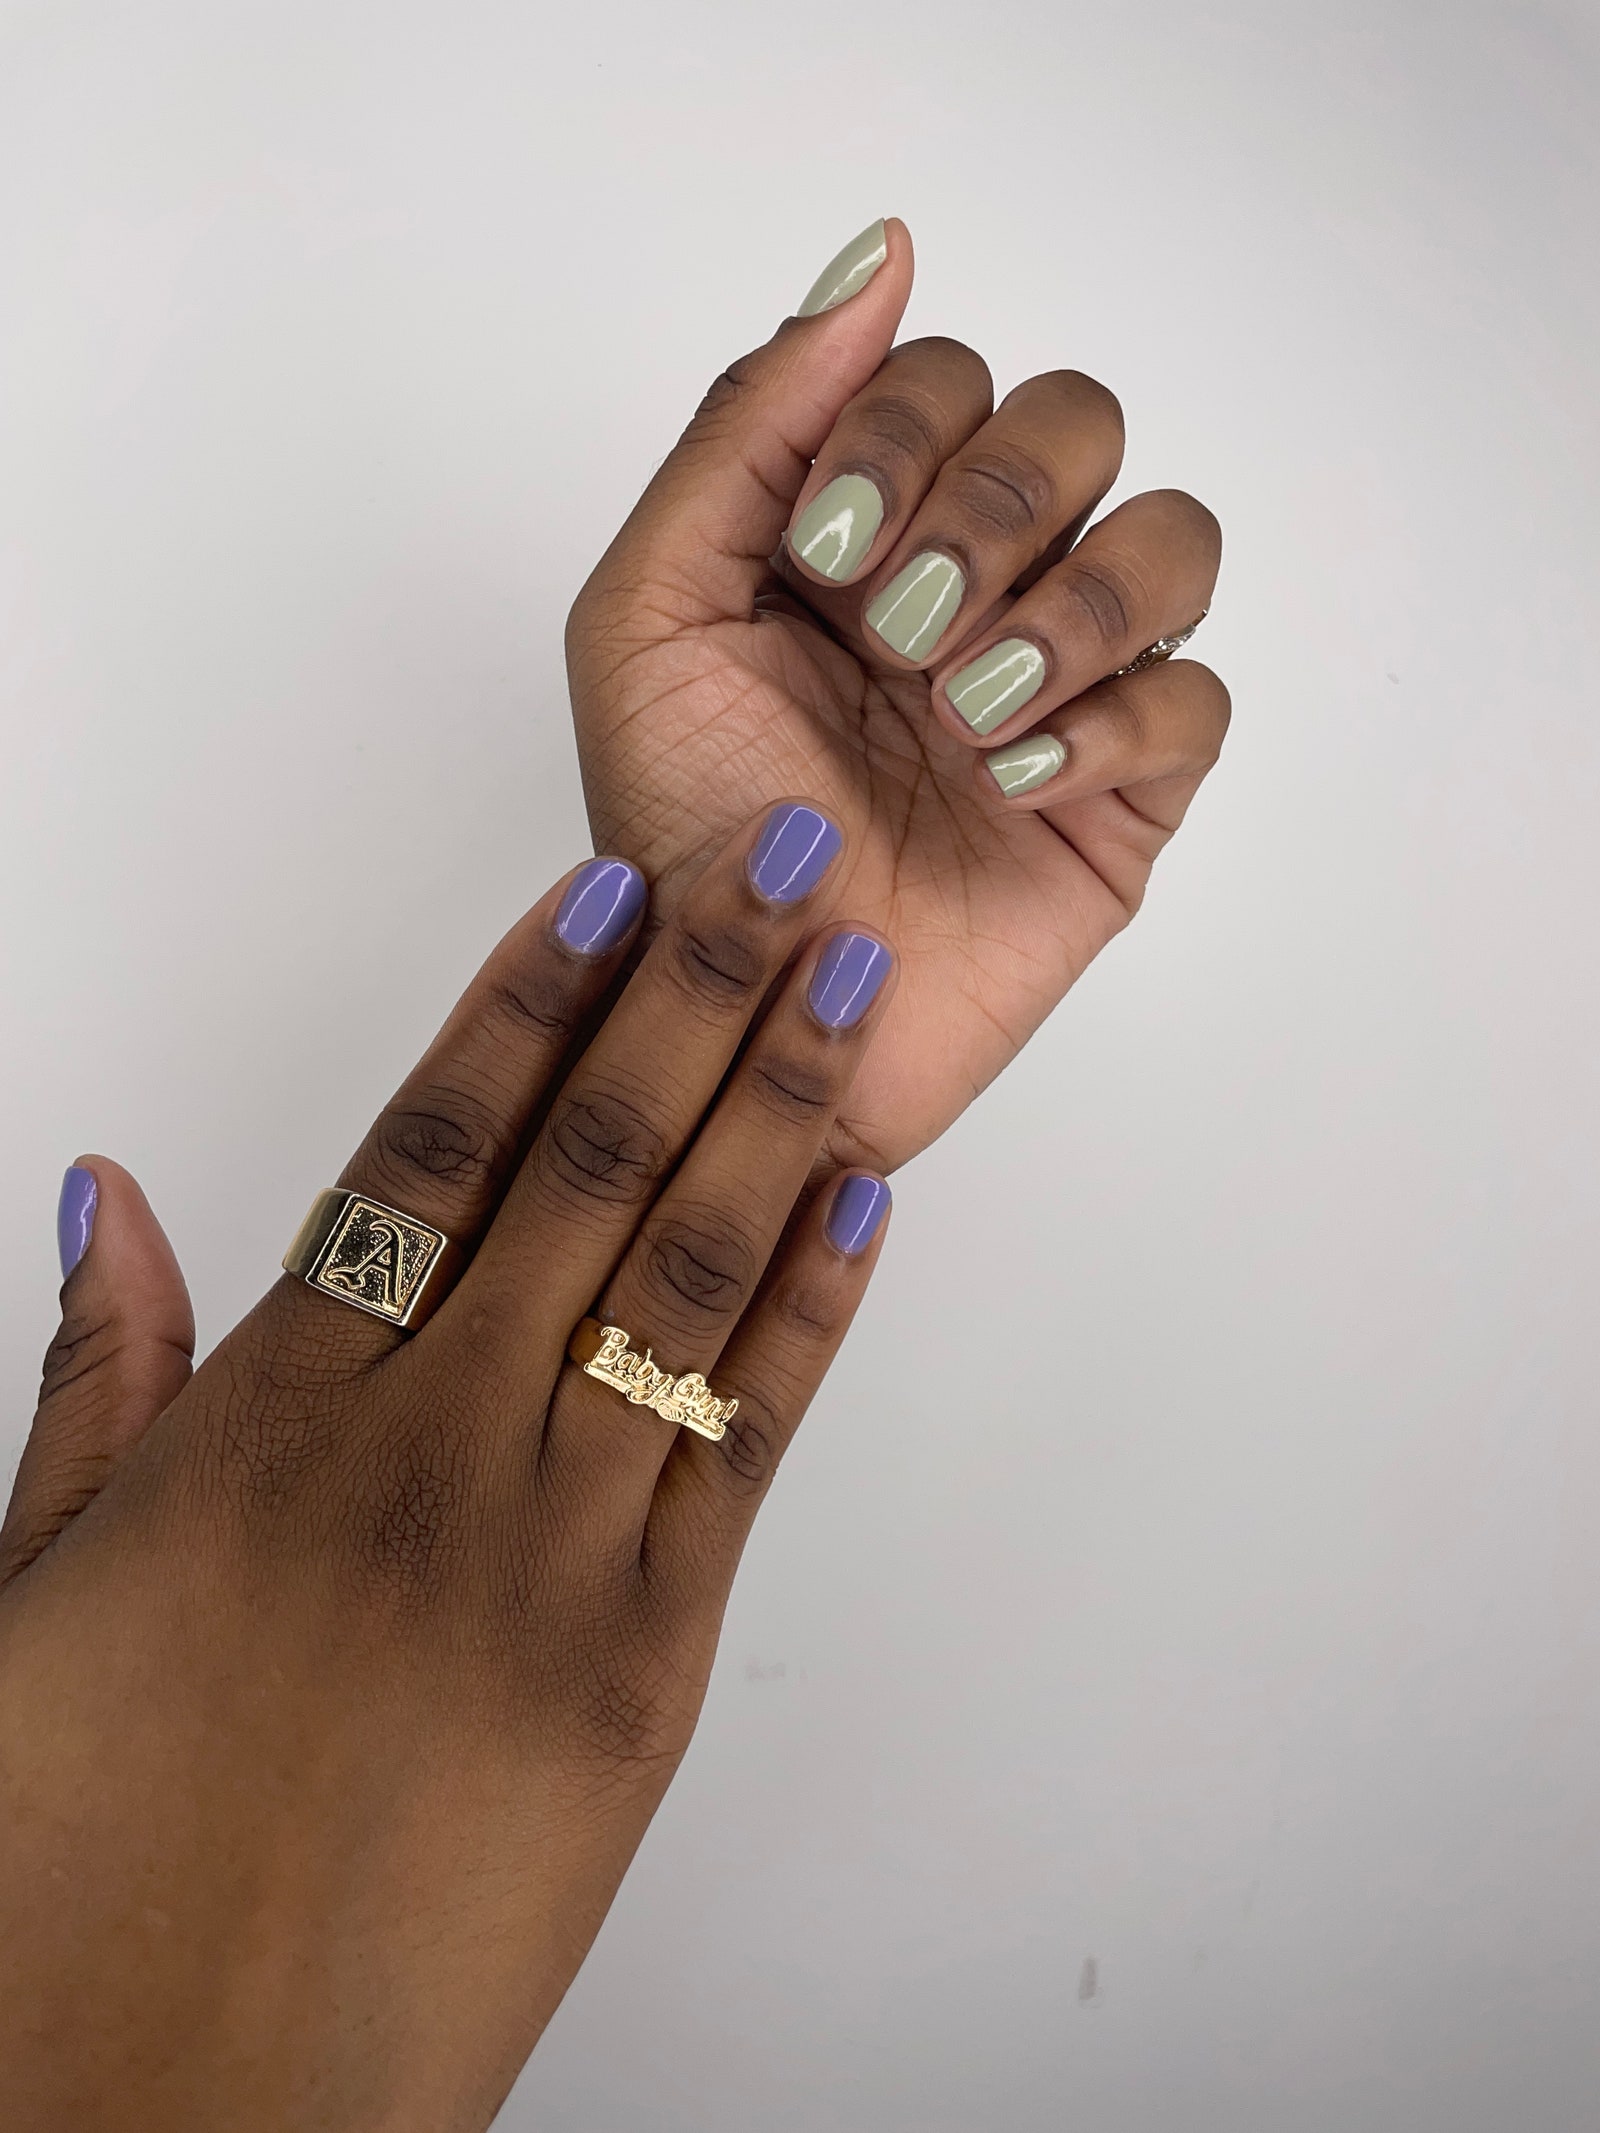 nailfie of Gabi Thorne's hands with a lavender polish on the left hand and minty green on the right